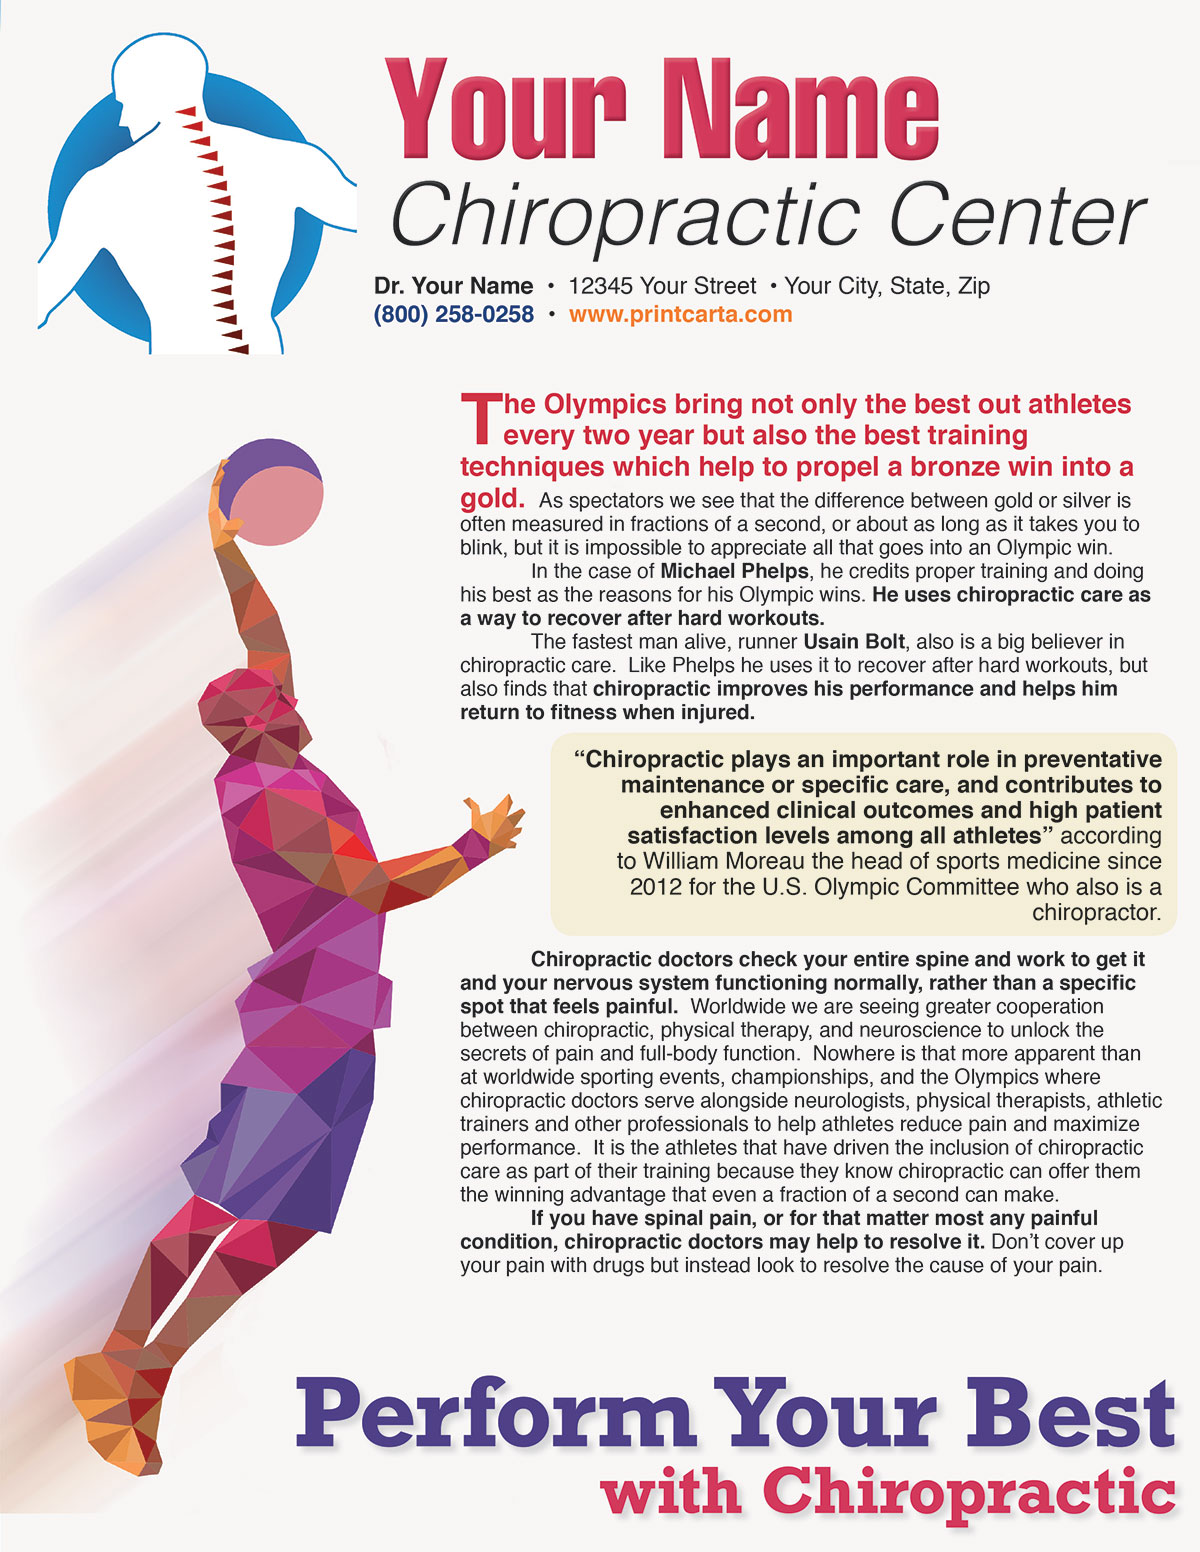 Perform Your Best with Chiropractic 